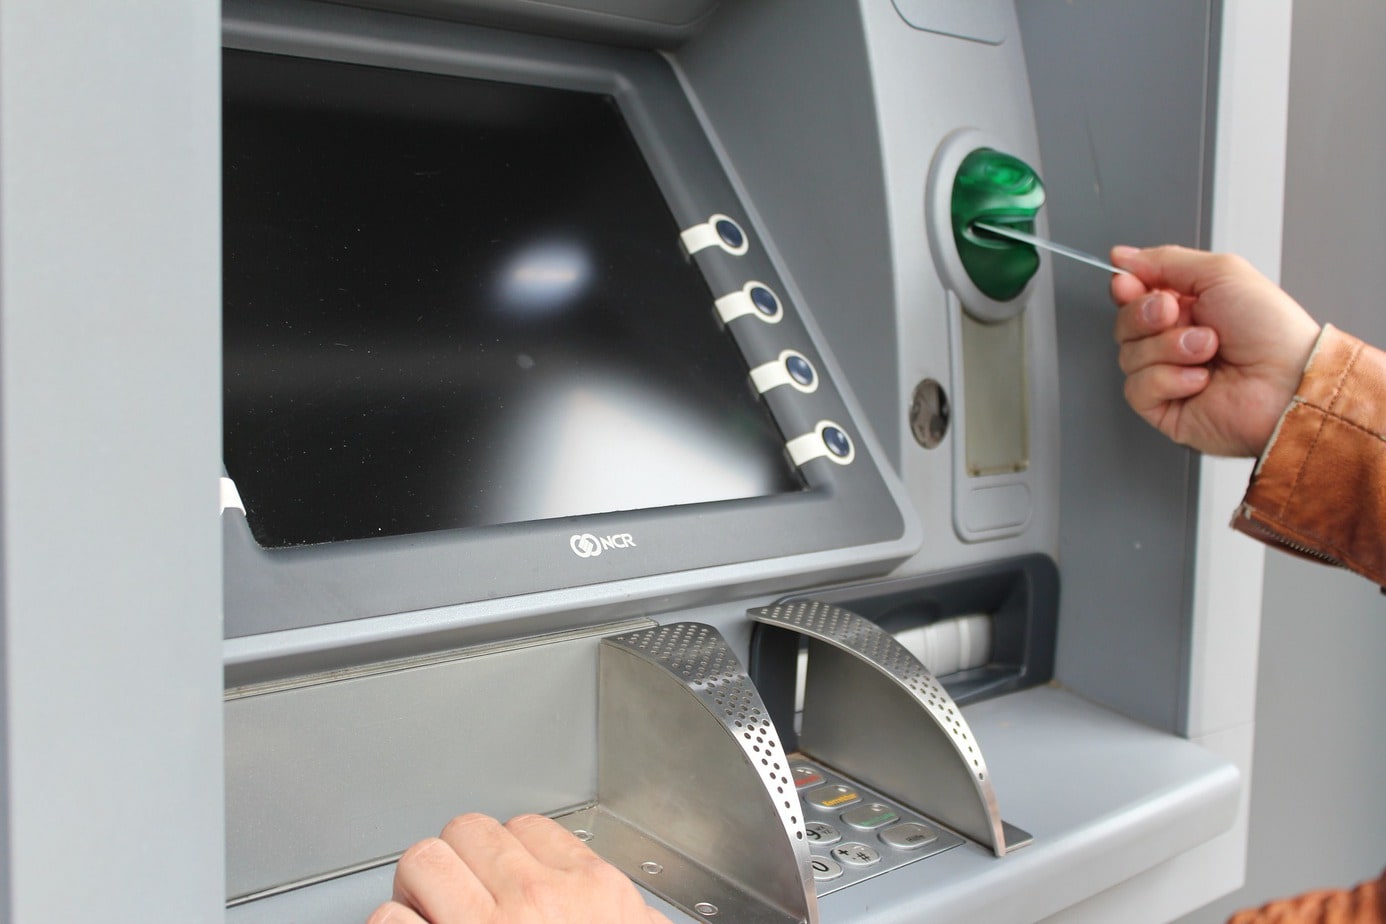 Bank fees drop following abolition of ATM withdrawal fees